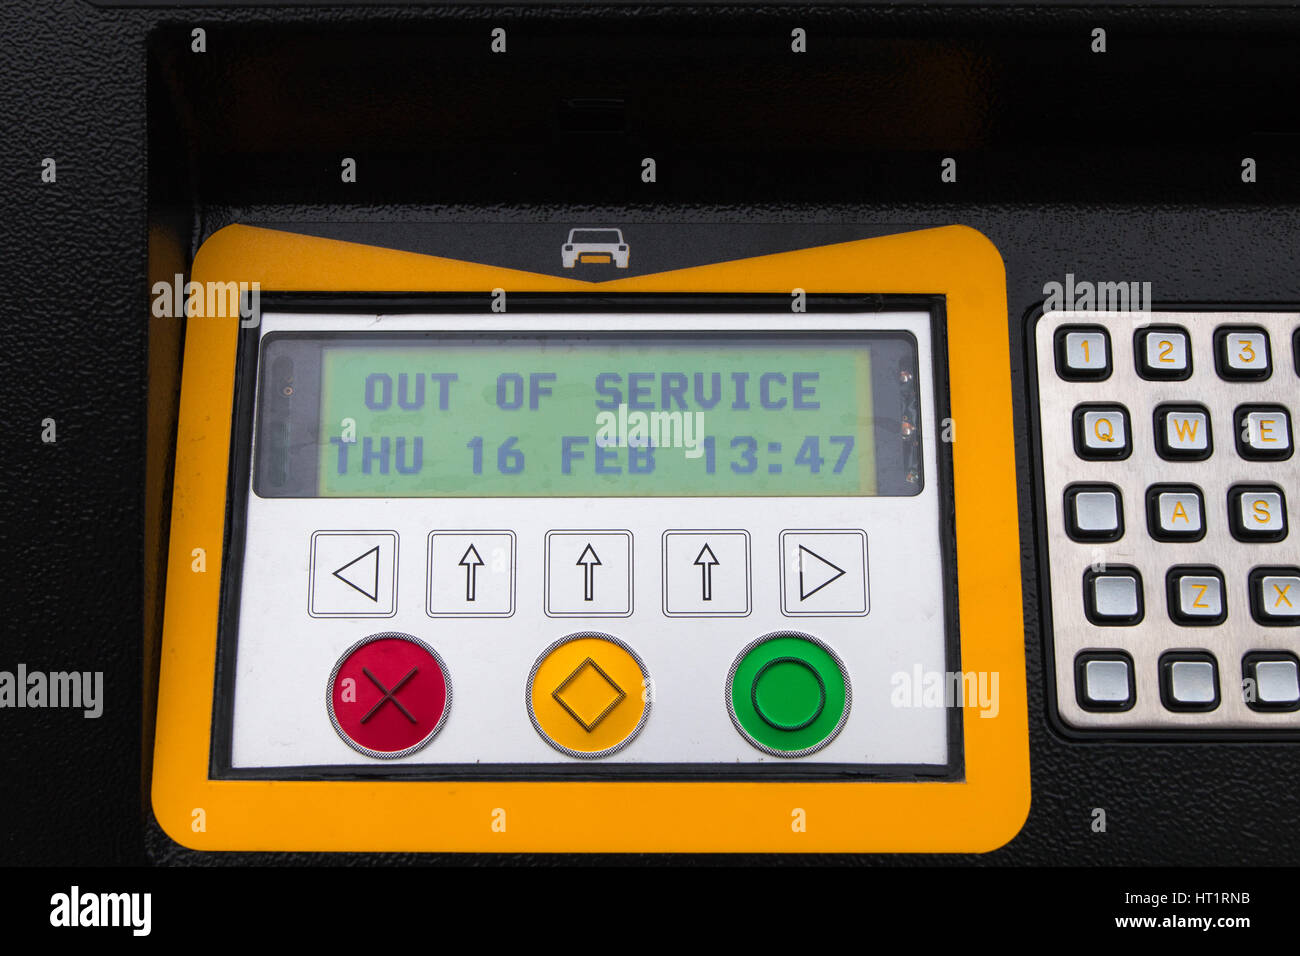 PARKING: An eletronic parking meter displaying an out of service error message. Stock Photo